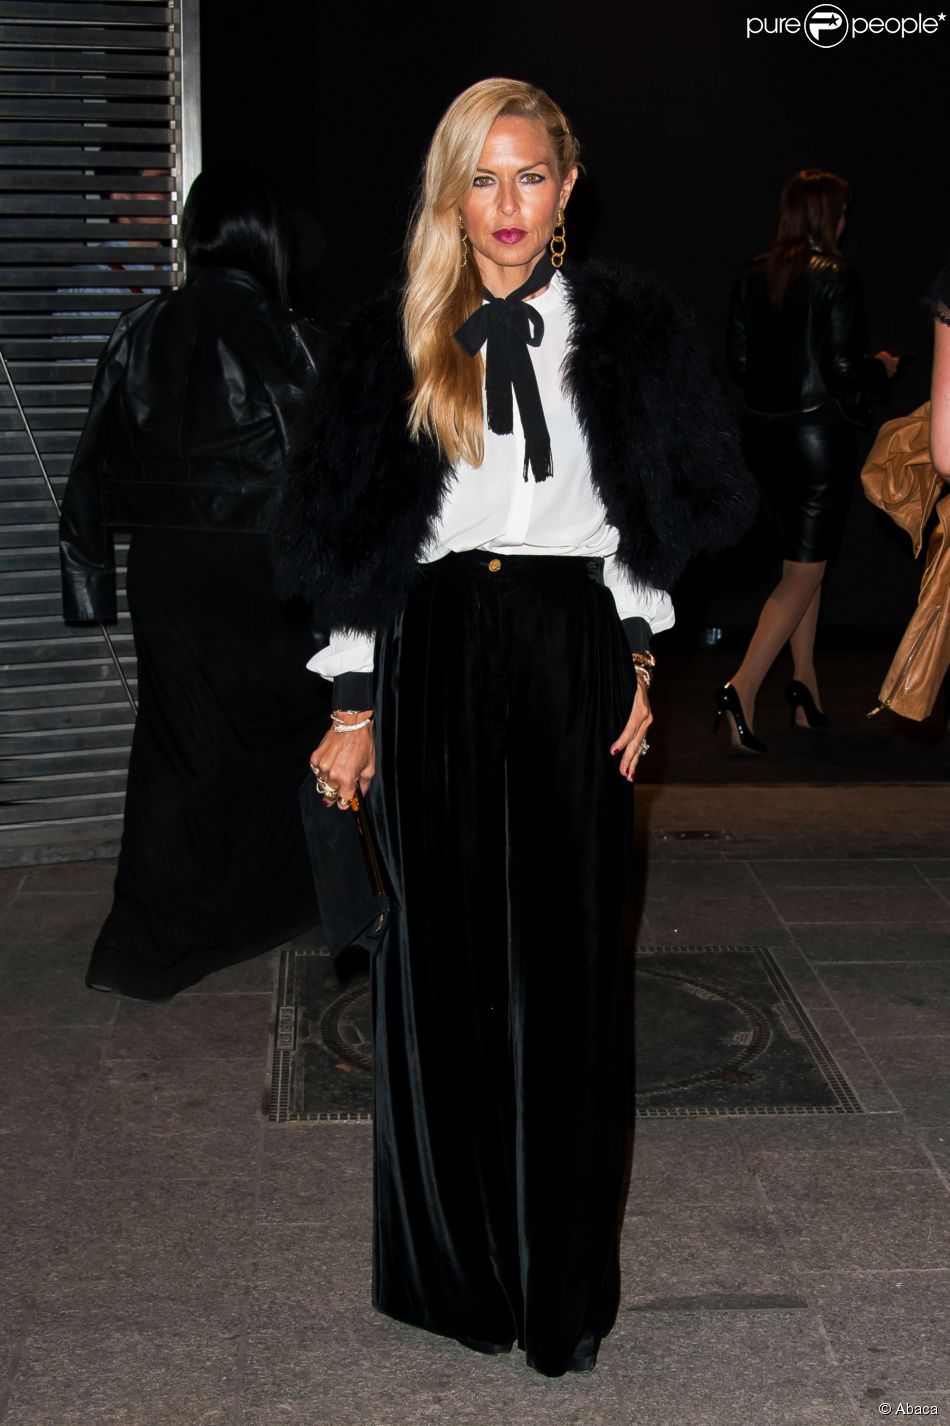 Rachel Zoe attending the Saint Laurent&#039;s Spring-Summer 2014/2015 Ready-To-Wear collection show held at the Carreau du Temple in Paris, France, on September 29, 2014. Photo by Nicolas Genin/ABACAPRESS.COM30/09/2014 - Paris